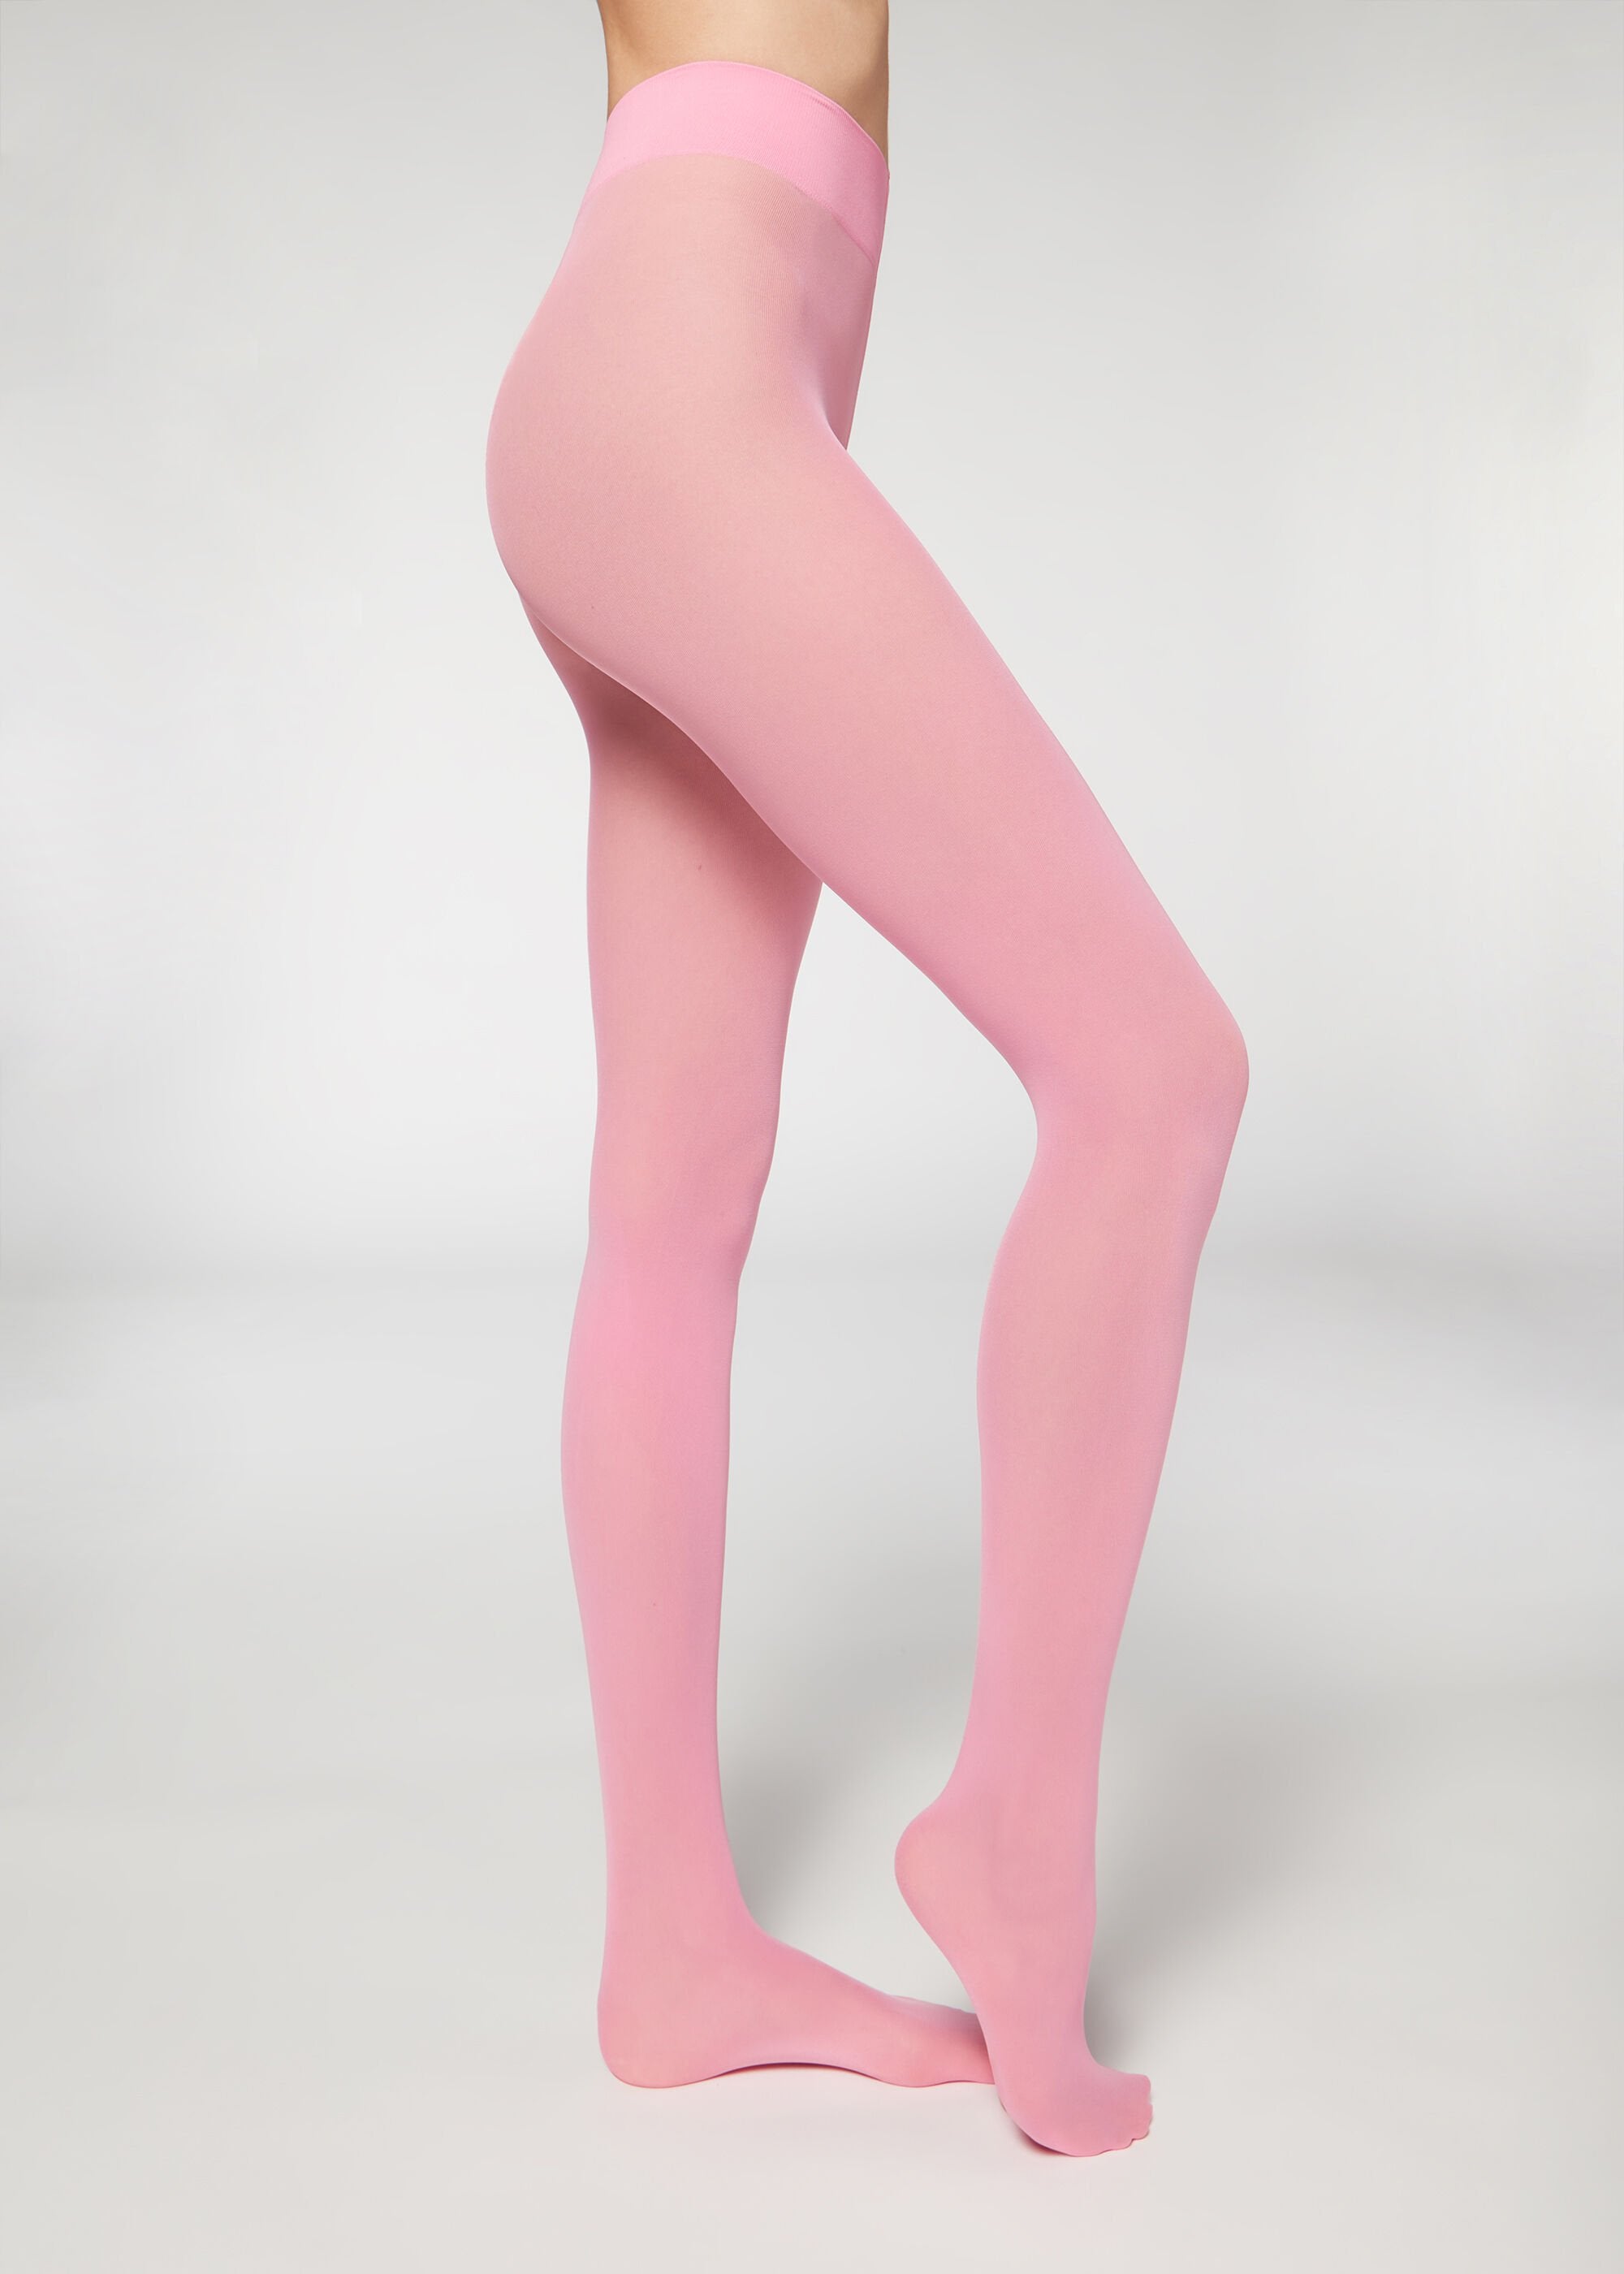  Sofsy Pink Tights For Women Opaque Pantyhose Stockings  Nylons Papaya Medium 1/pack Made In Italy